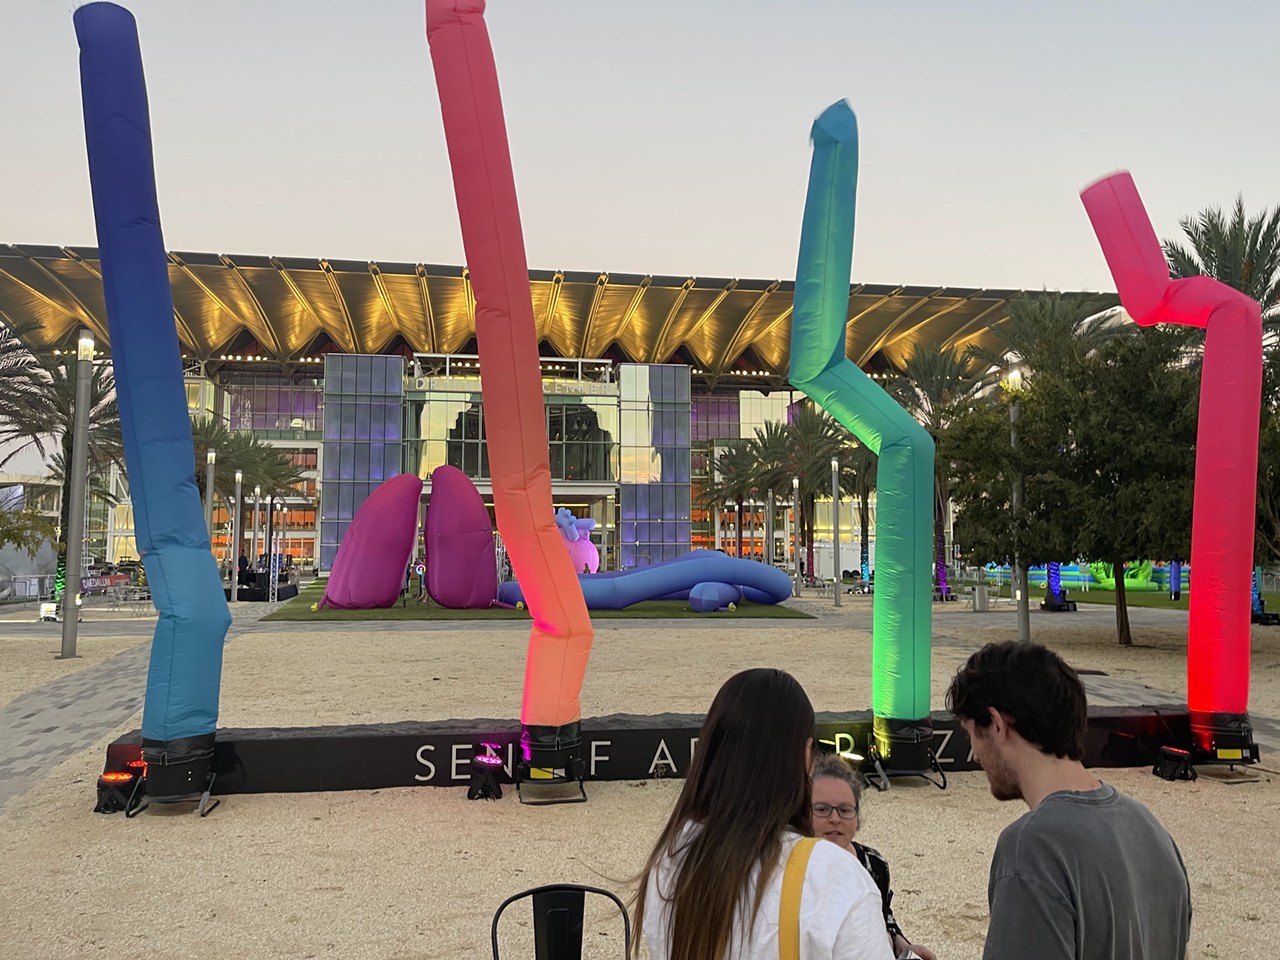 Creative City Project's latest Orlando installation 'Airplay' is an kaleidoscopic, inflatable labyrinth